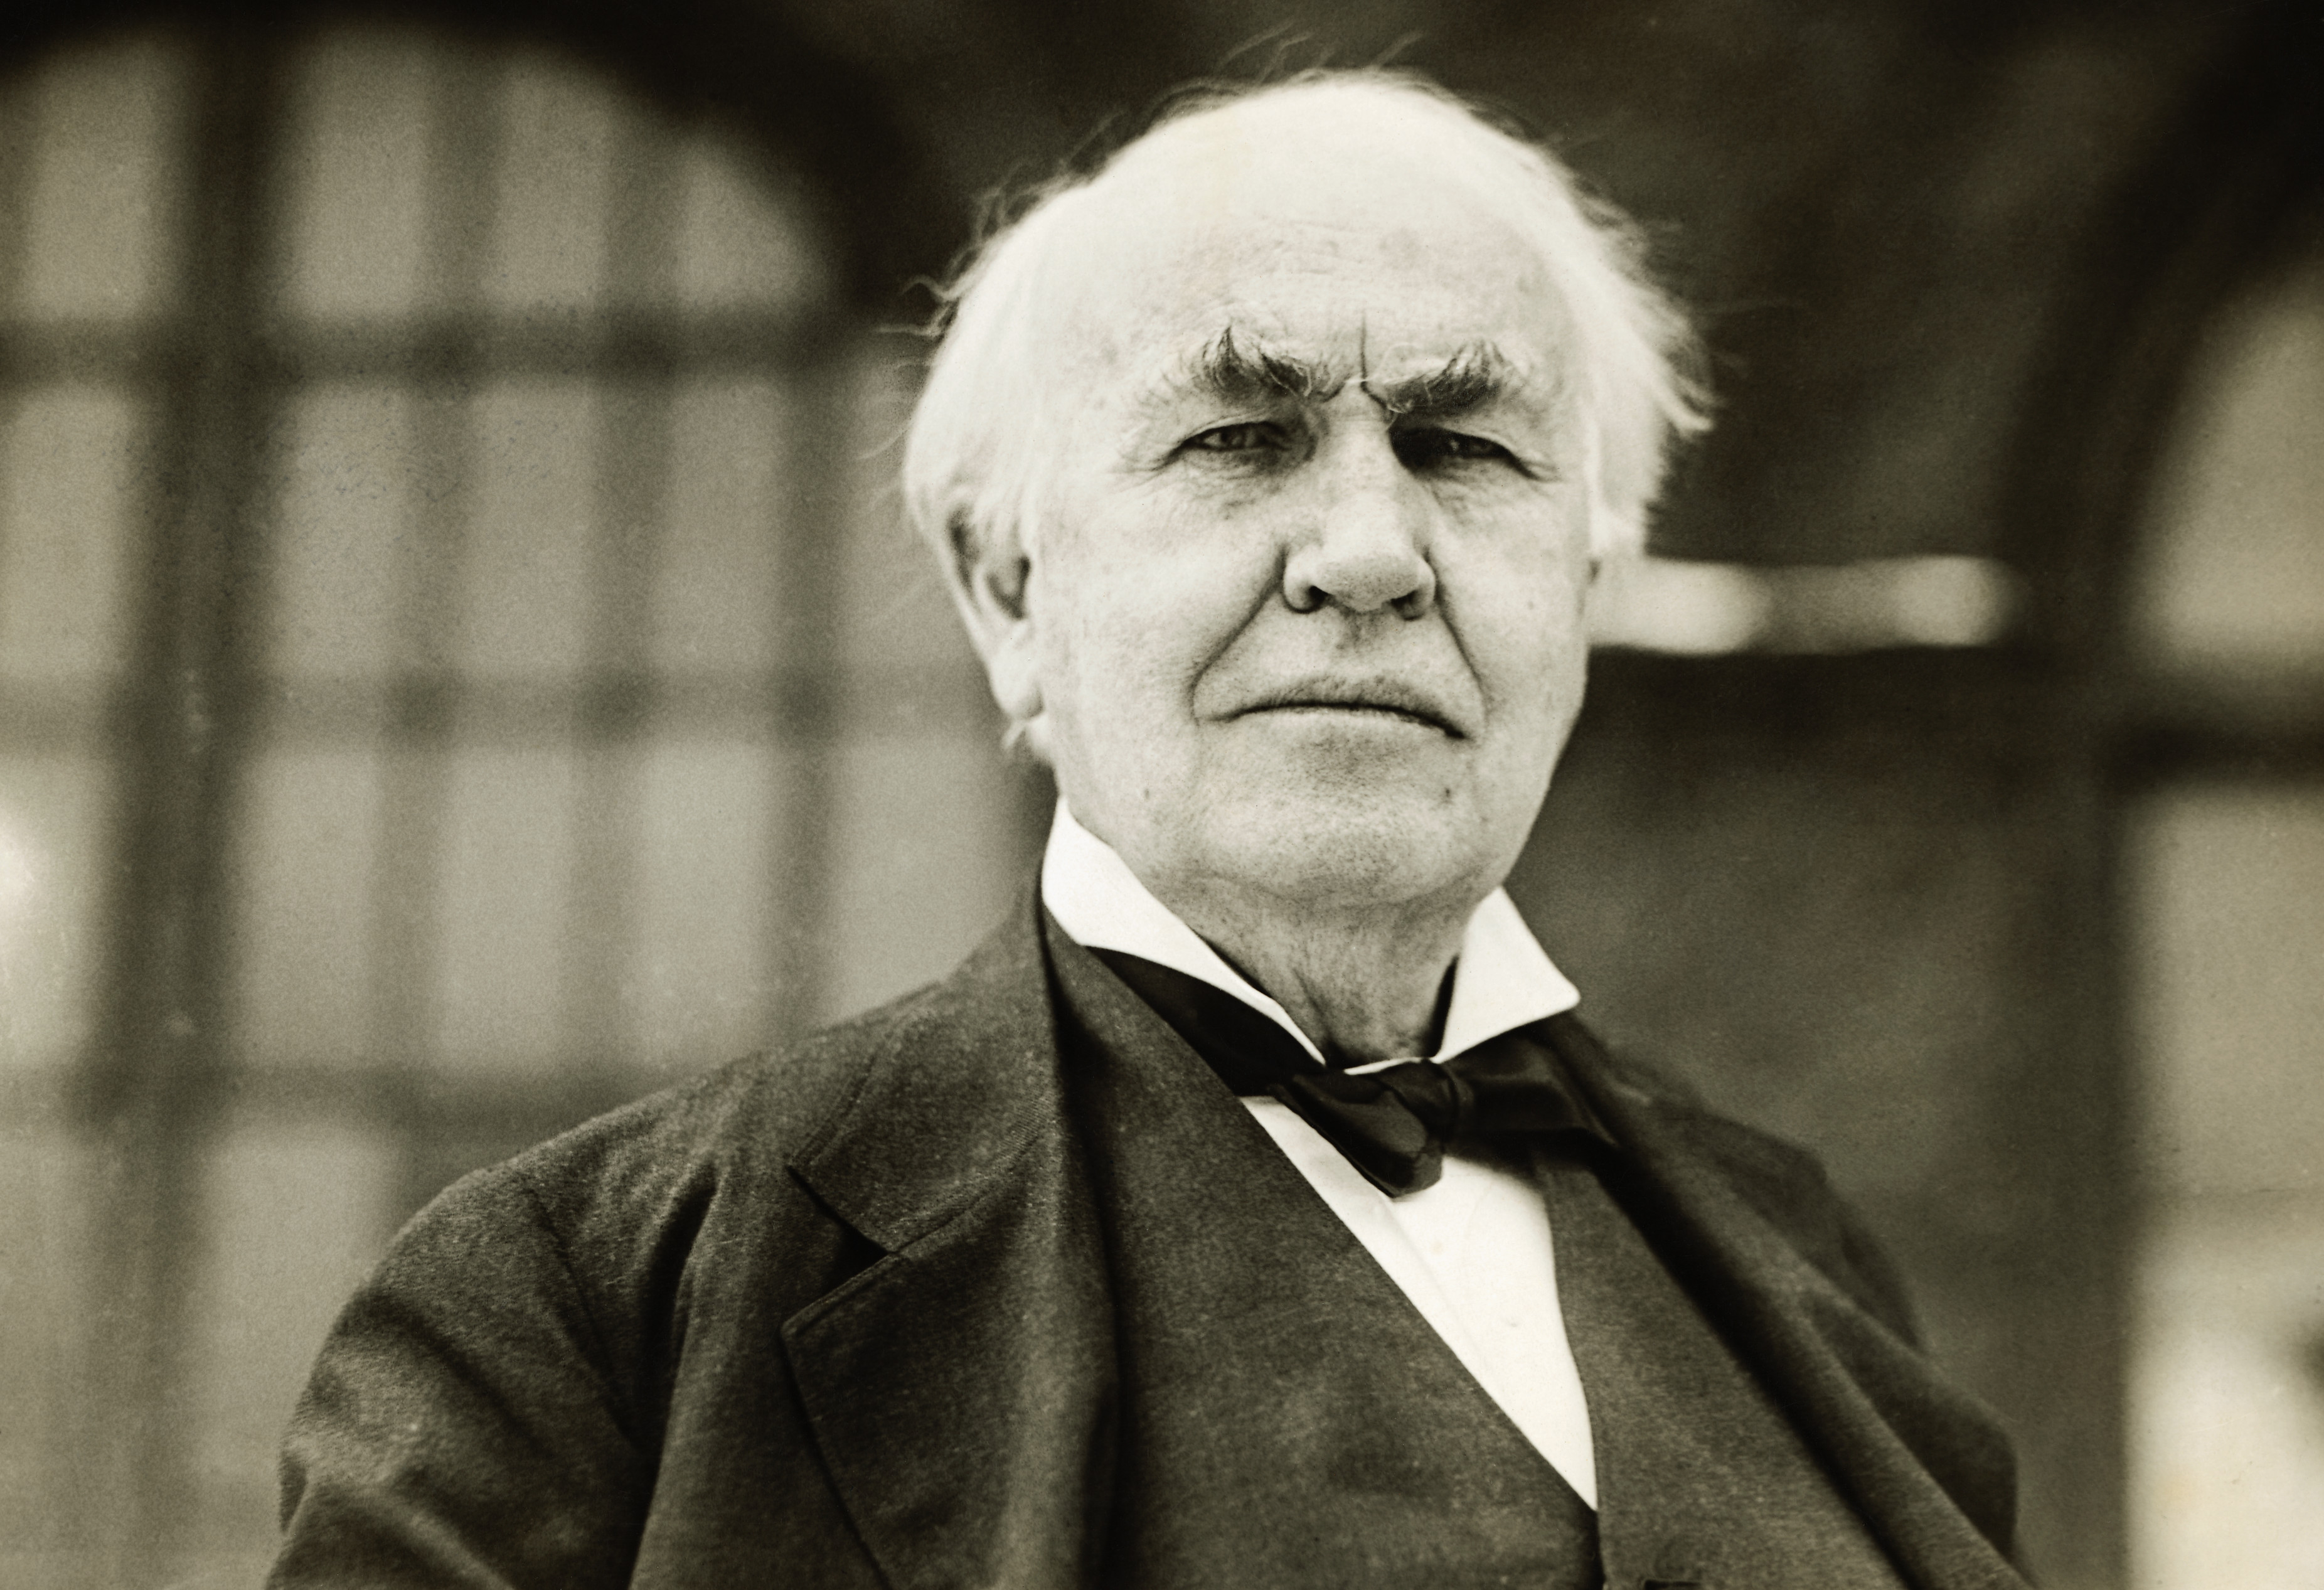 ca. 1890-1931 --- Thomas Edison (1847-1931), was a prolific inventor who was issued over 1,000 patents over his lifetime. --- Image by © Underwood & Underwood/Underwood & Underwood/Corbis